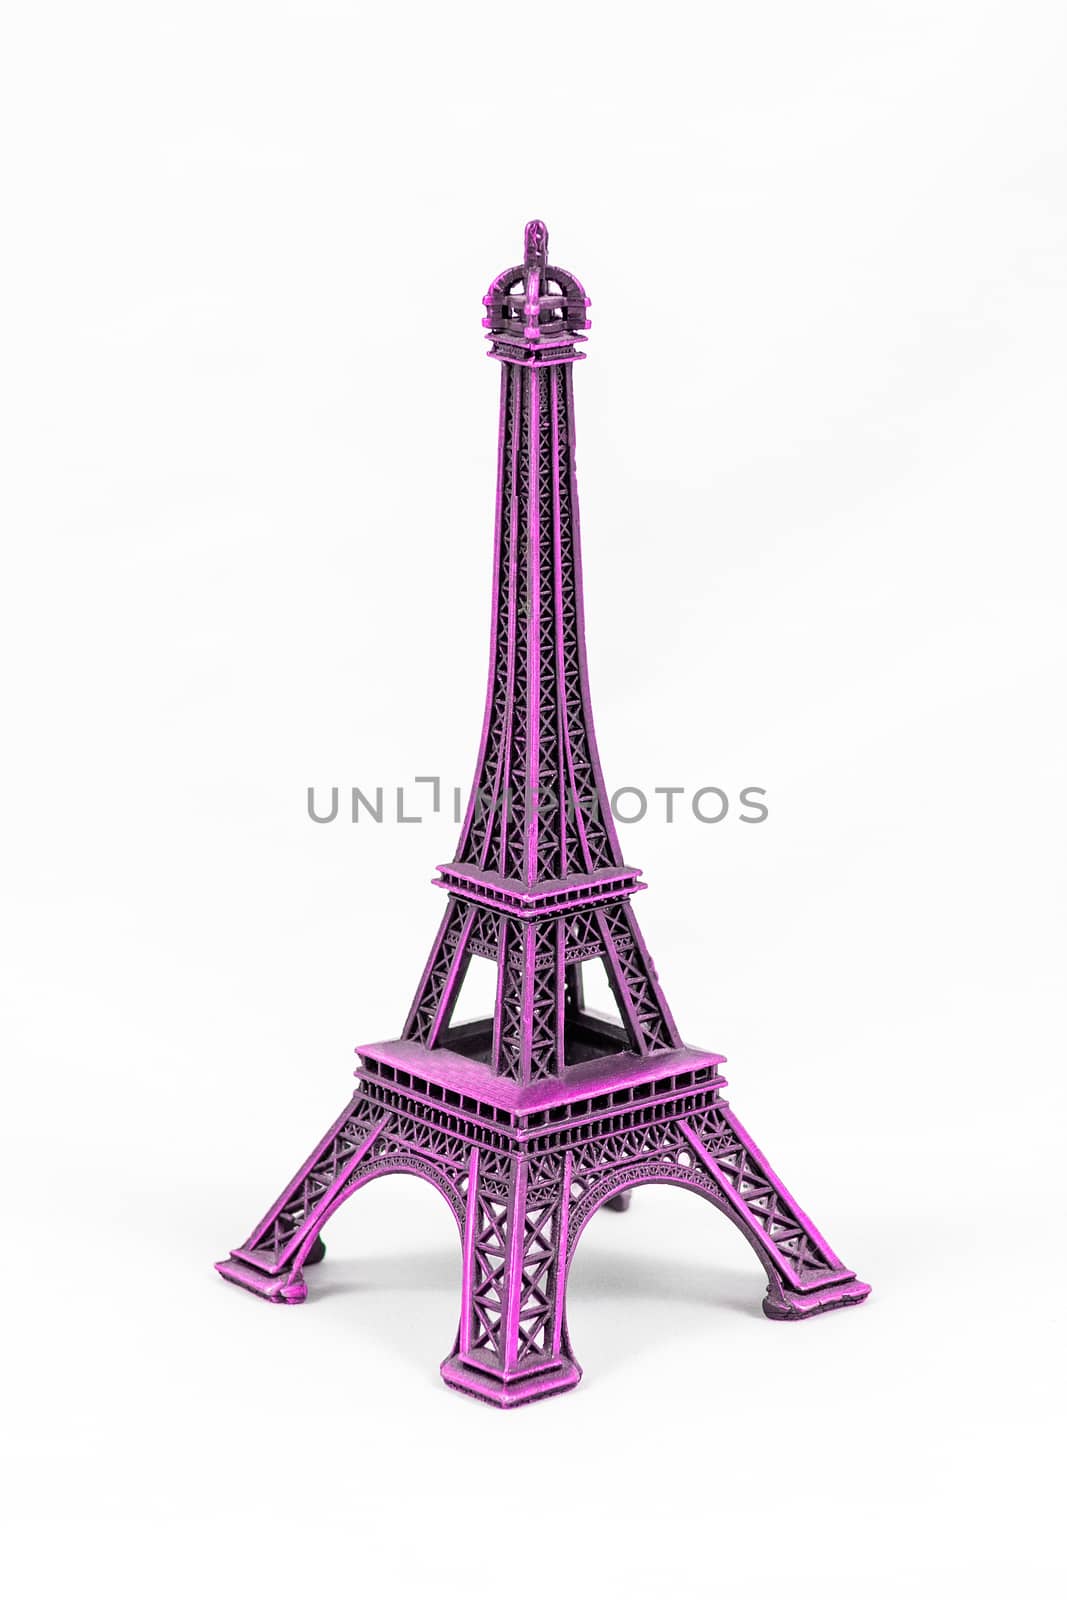 Close up shot of a purple miniature model of the Eiffel Tower isolated on a white background